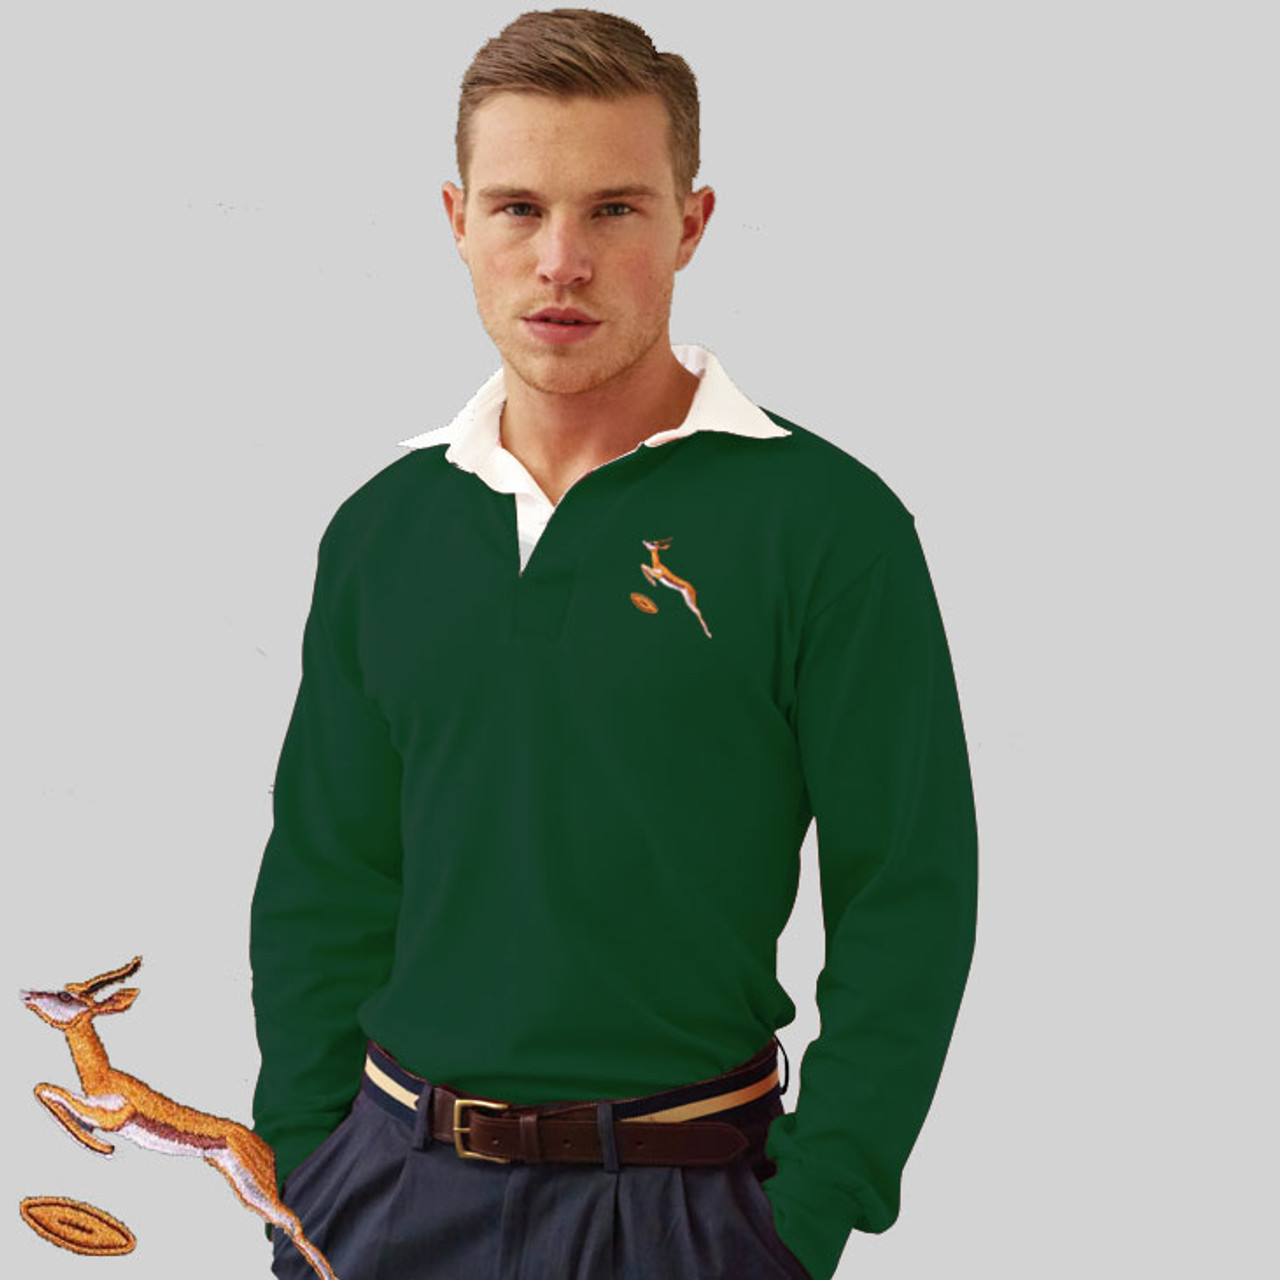 south africa rugby jersey